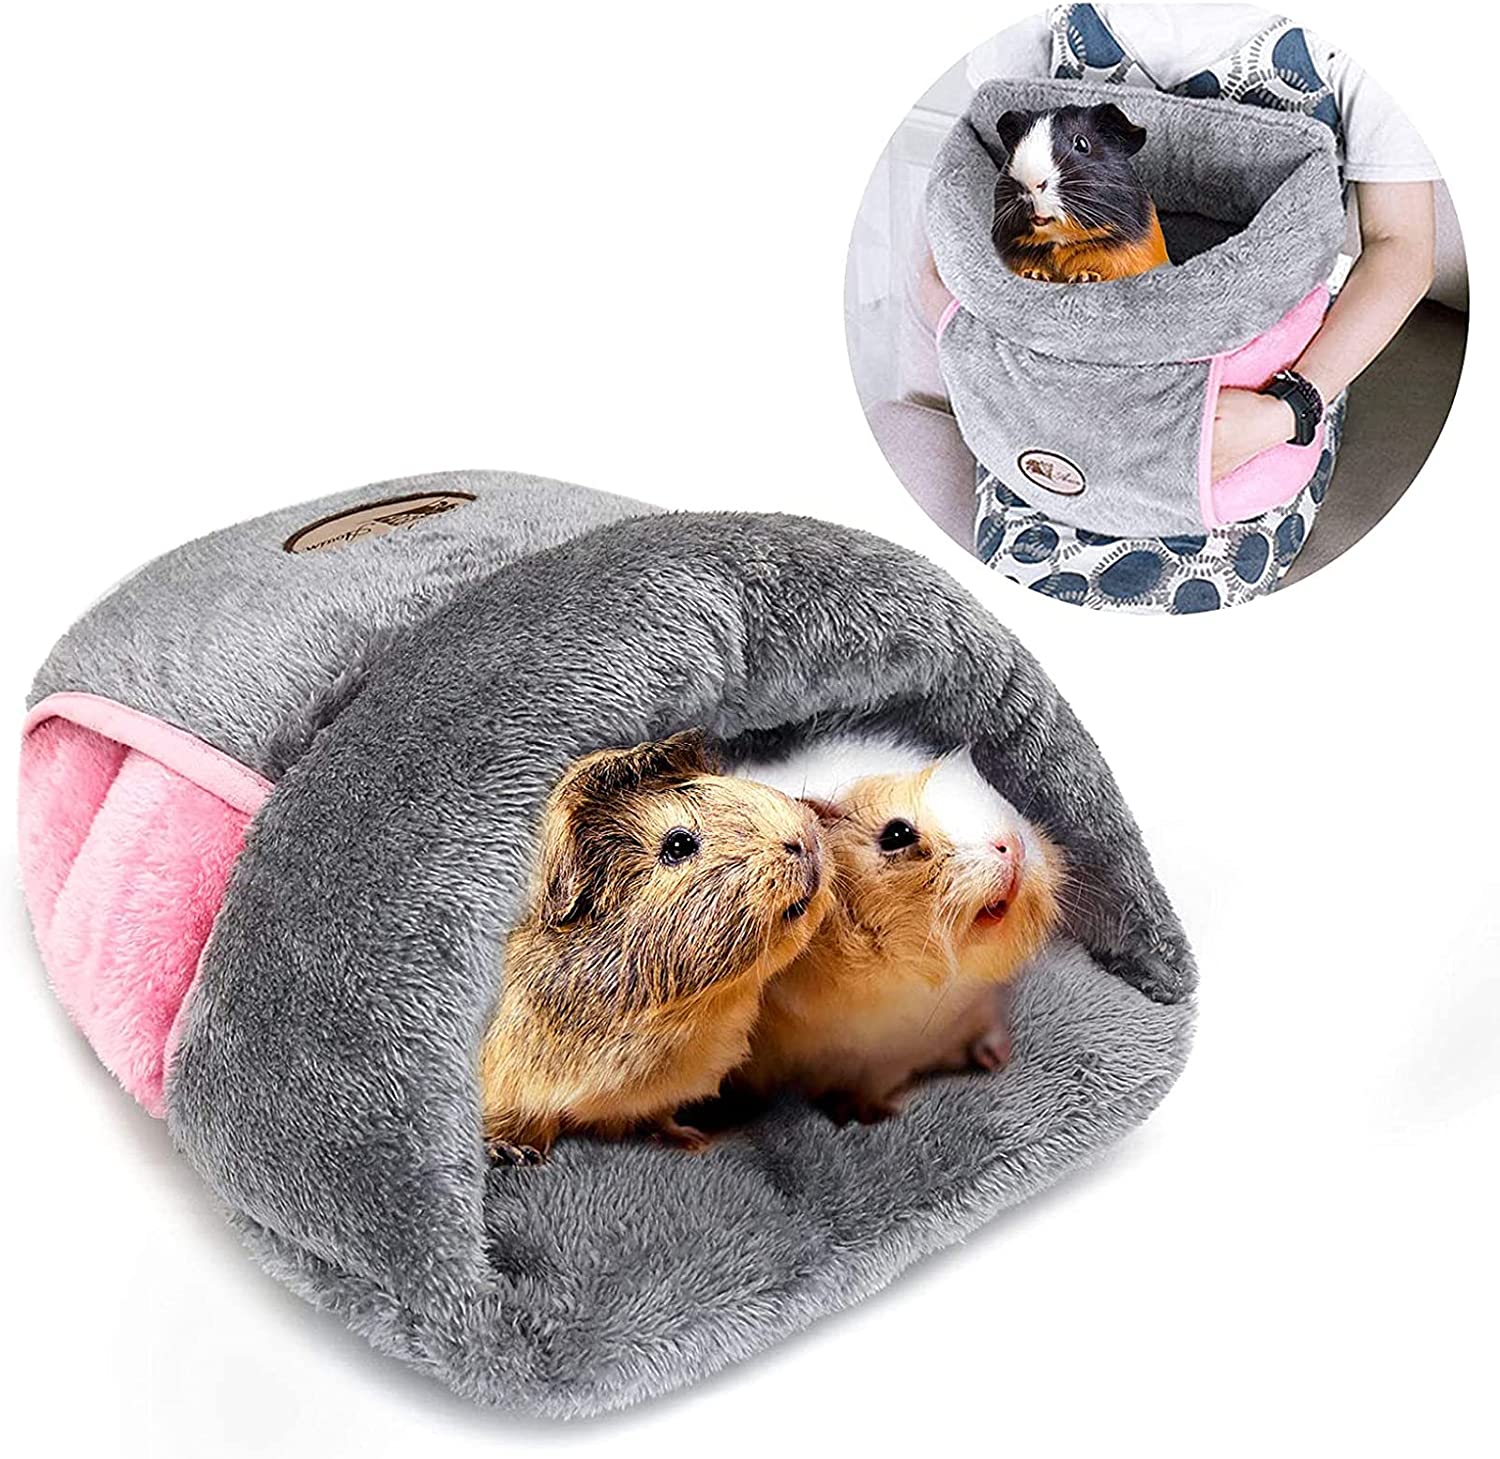 gifts-for-guinea-pigs-snuggle-fleece